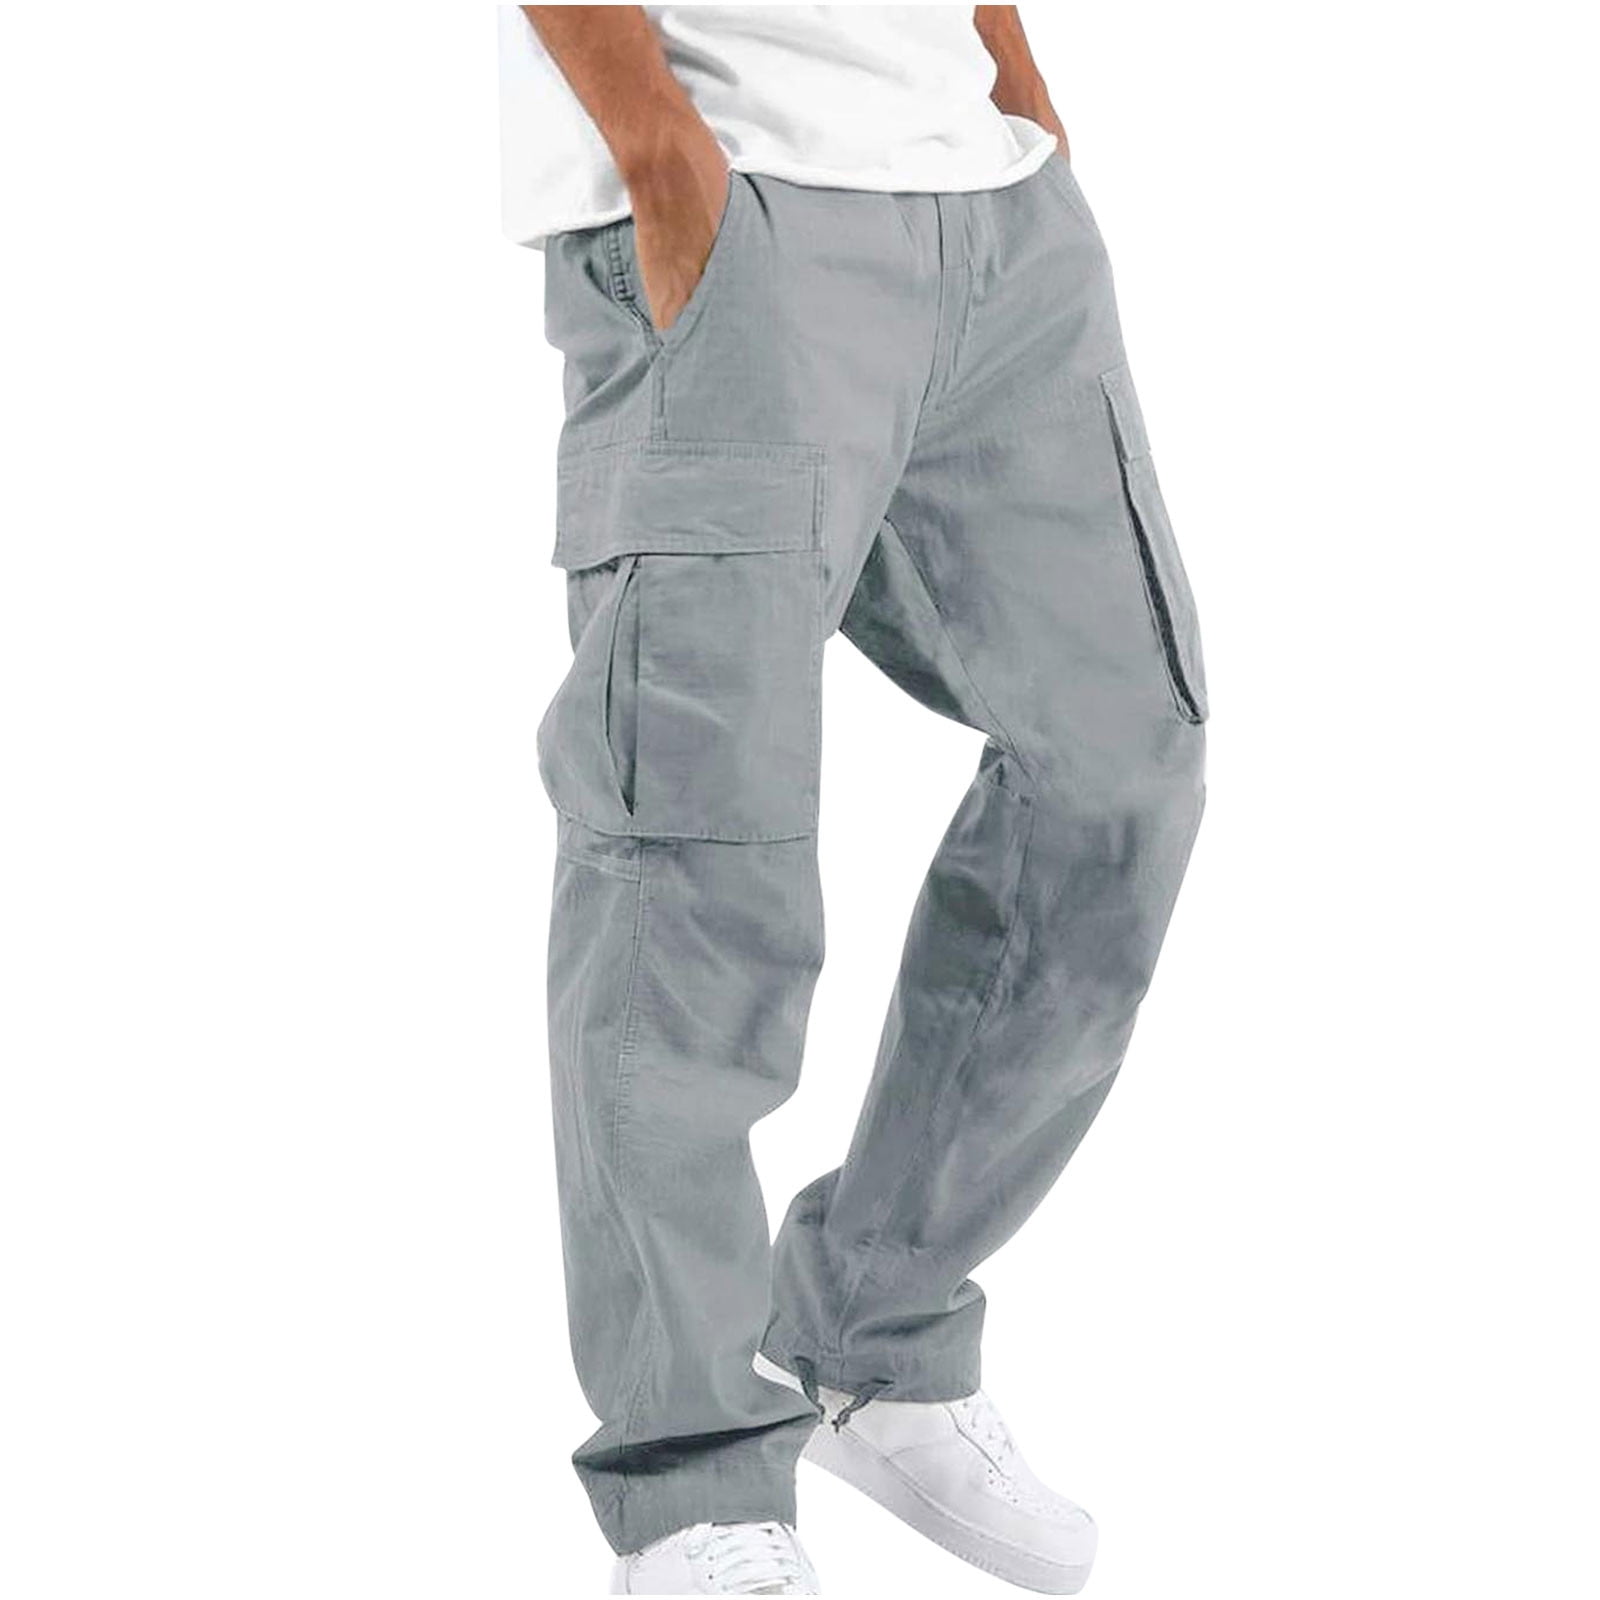 Spring Sale: All Items Grey Football Pants & Tights. Nike.com